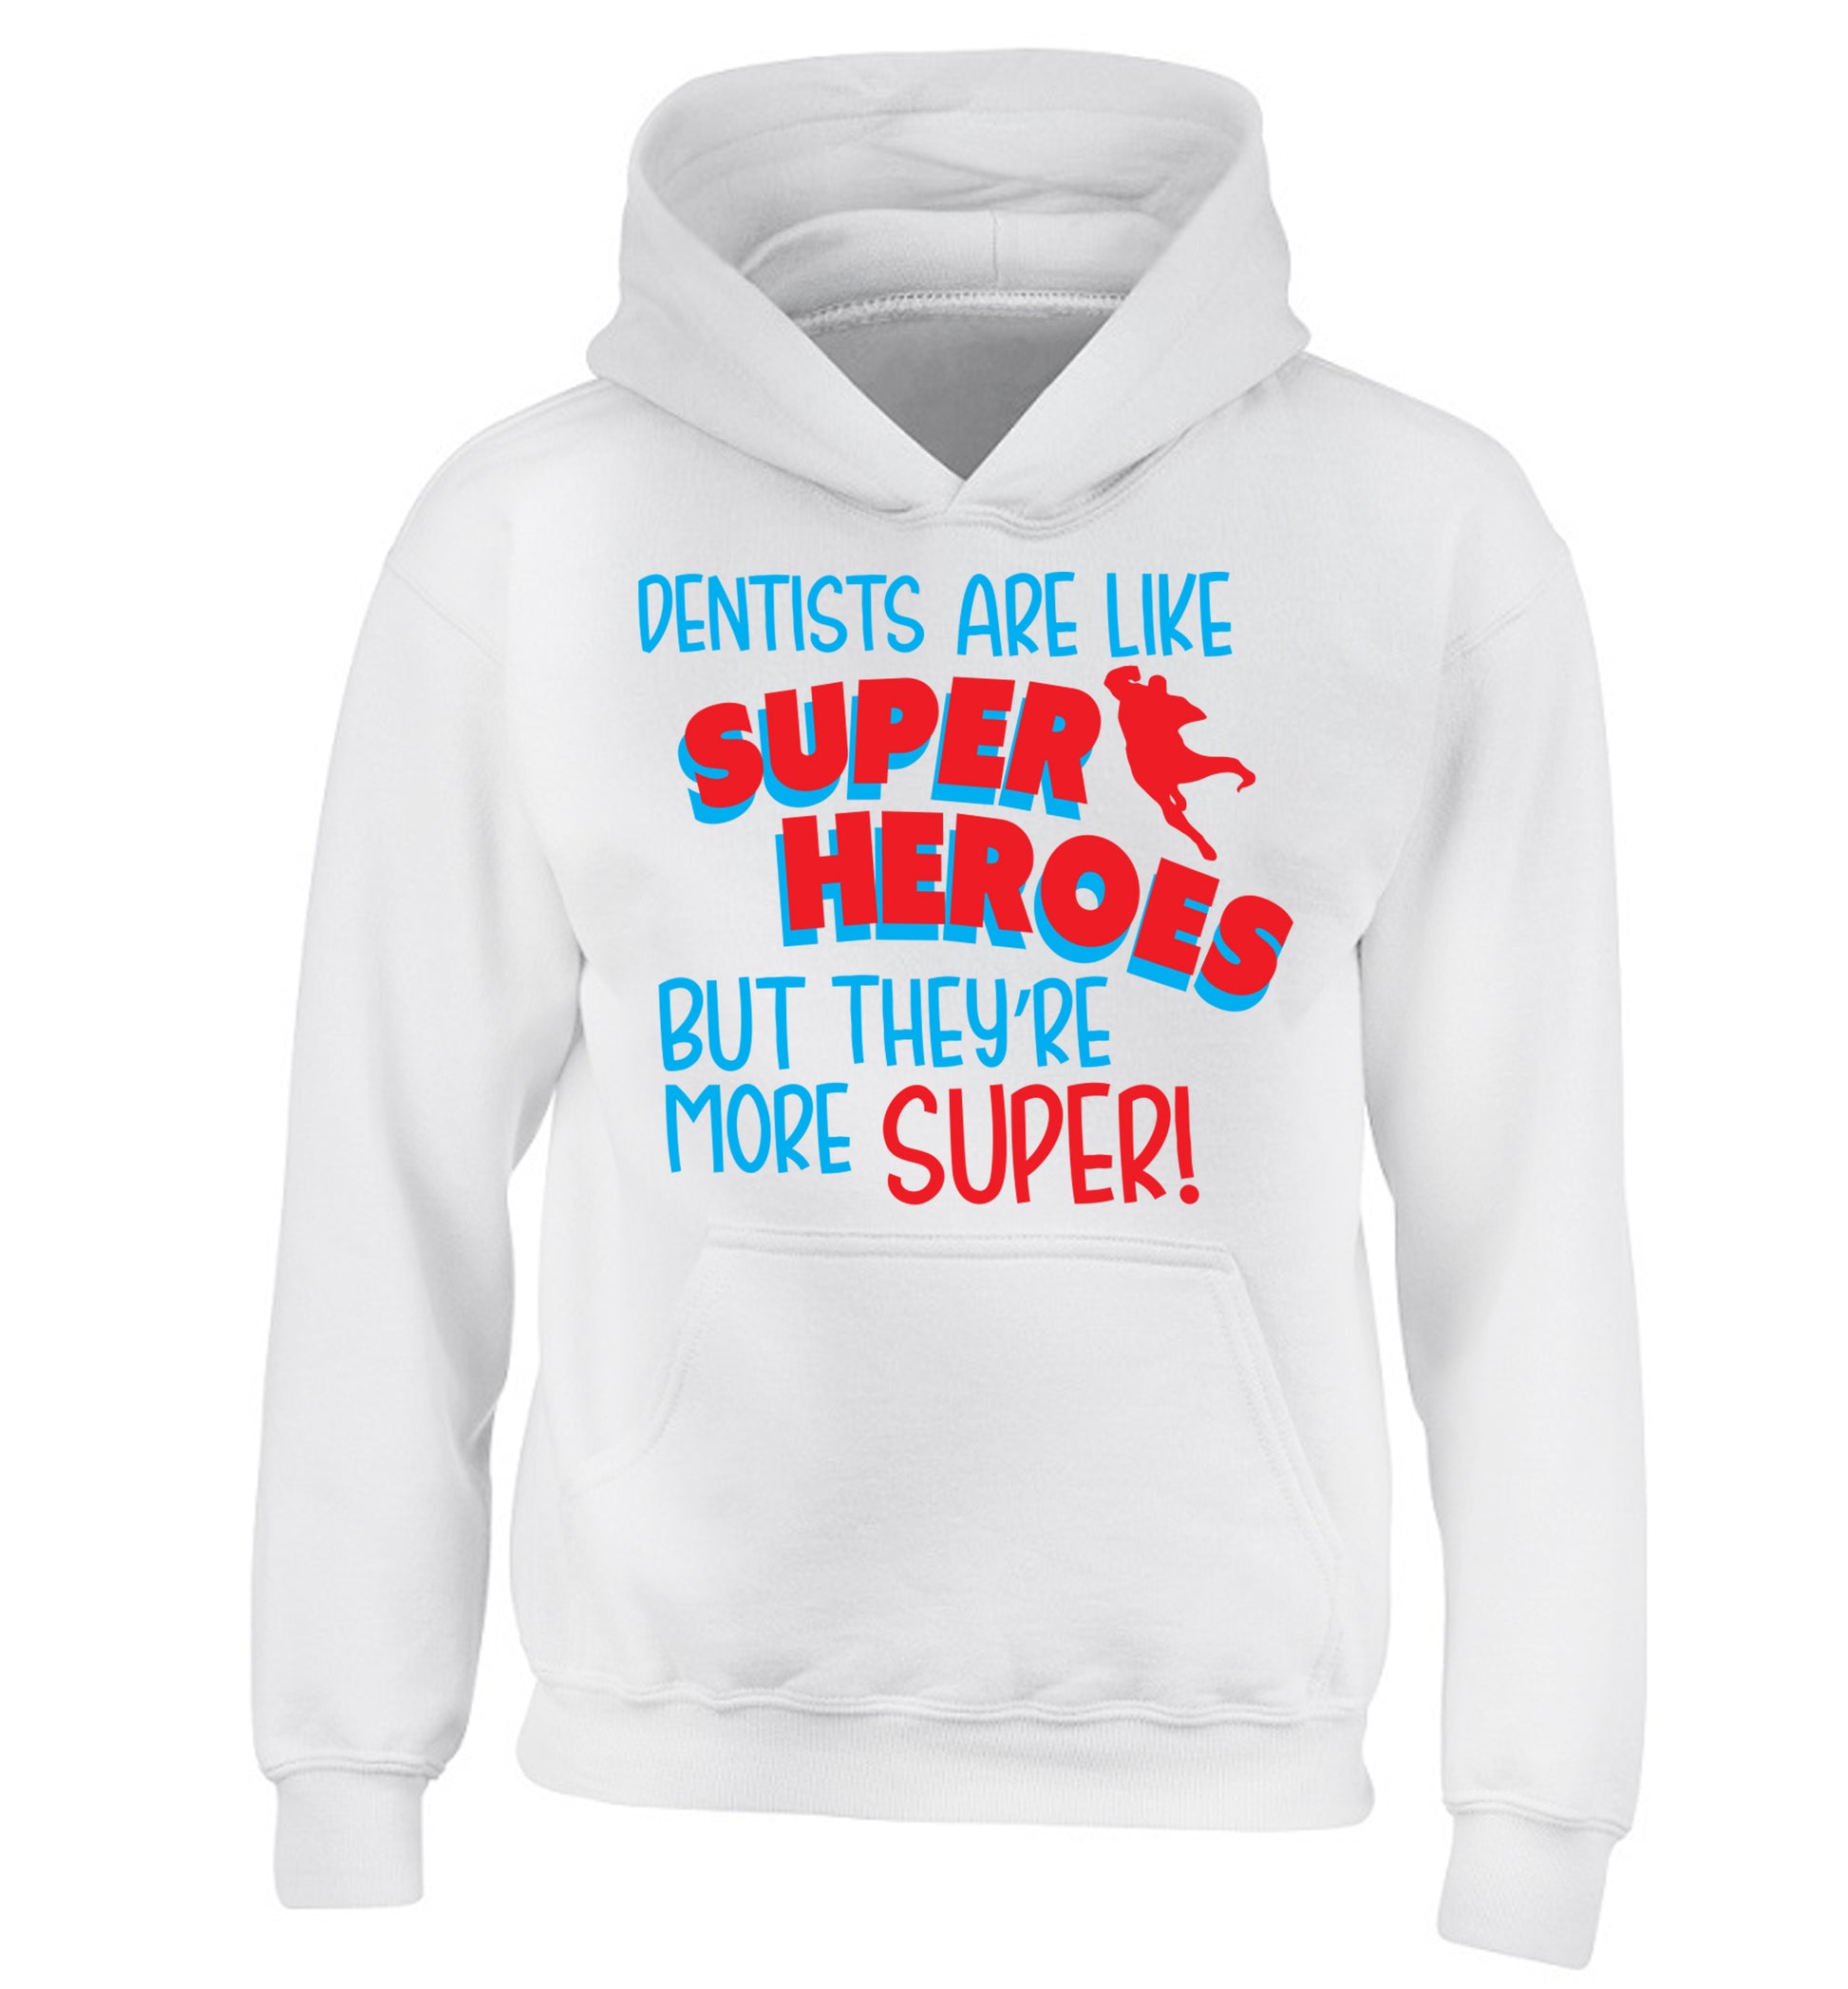 Dentists are like superheros but they're more super children's white hoodie 12-13 Years